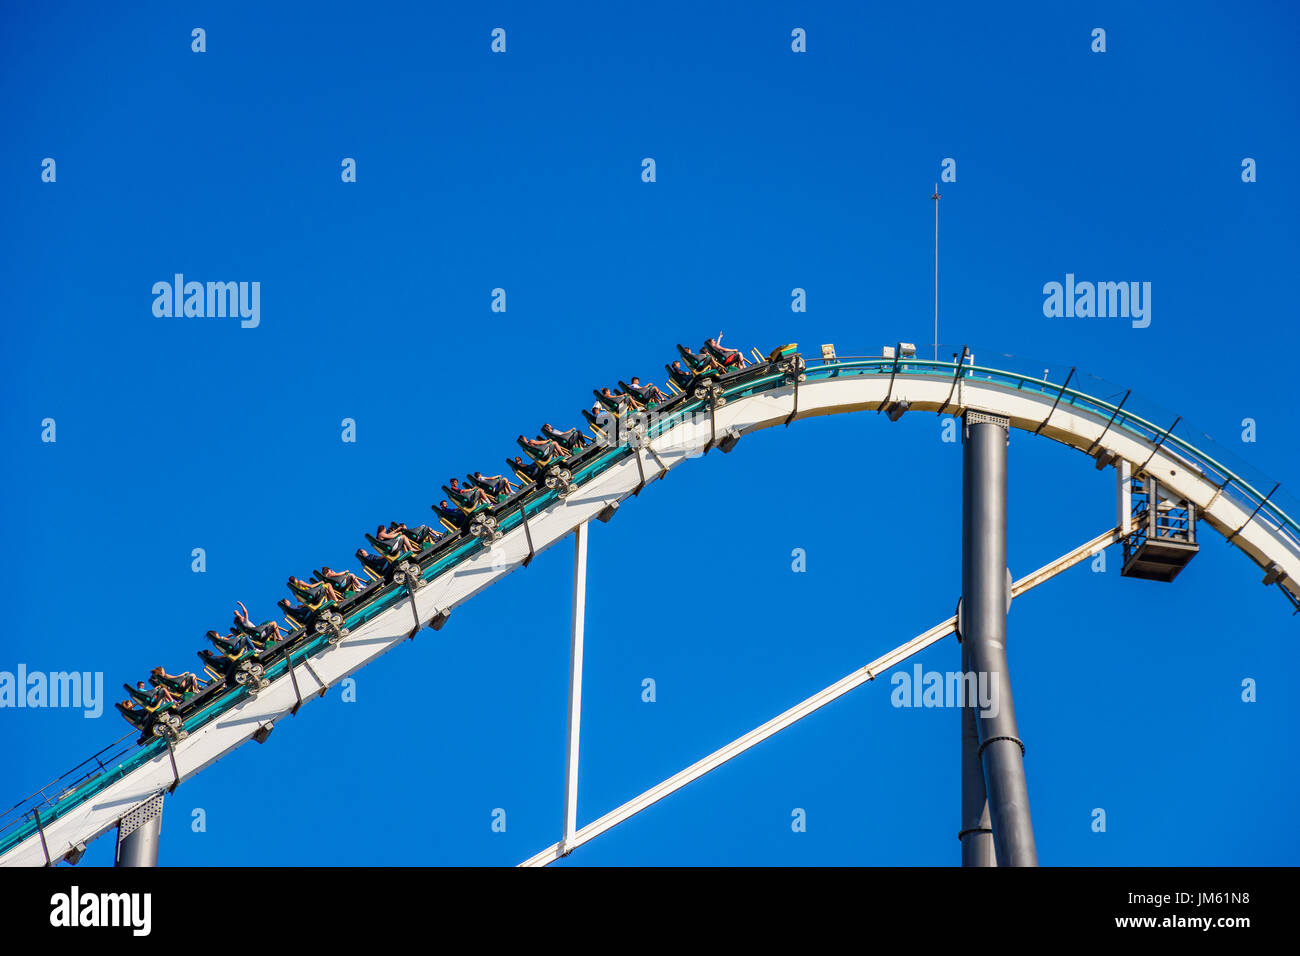 Shambhala is a steel Hyper Coaster roller coaster located at PortAventura in Salou, Spain. Its 256ft tall and 134km/h fast fahypercoaster Stock Photo